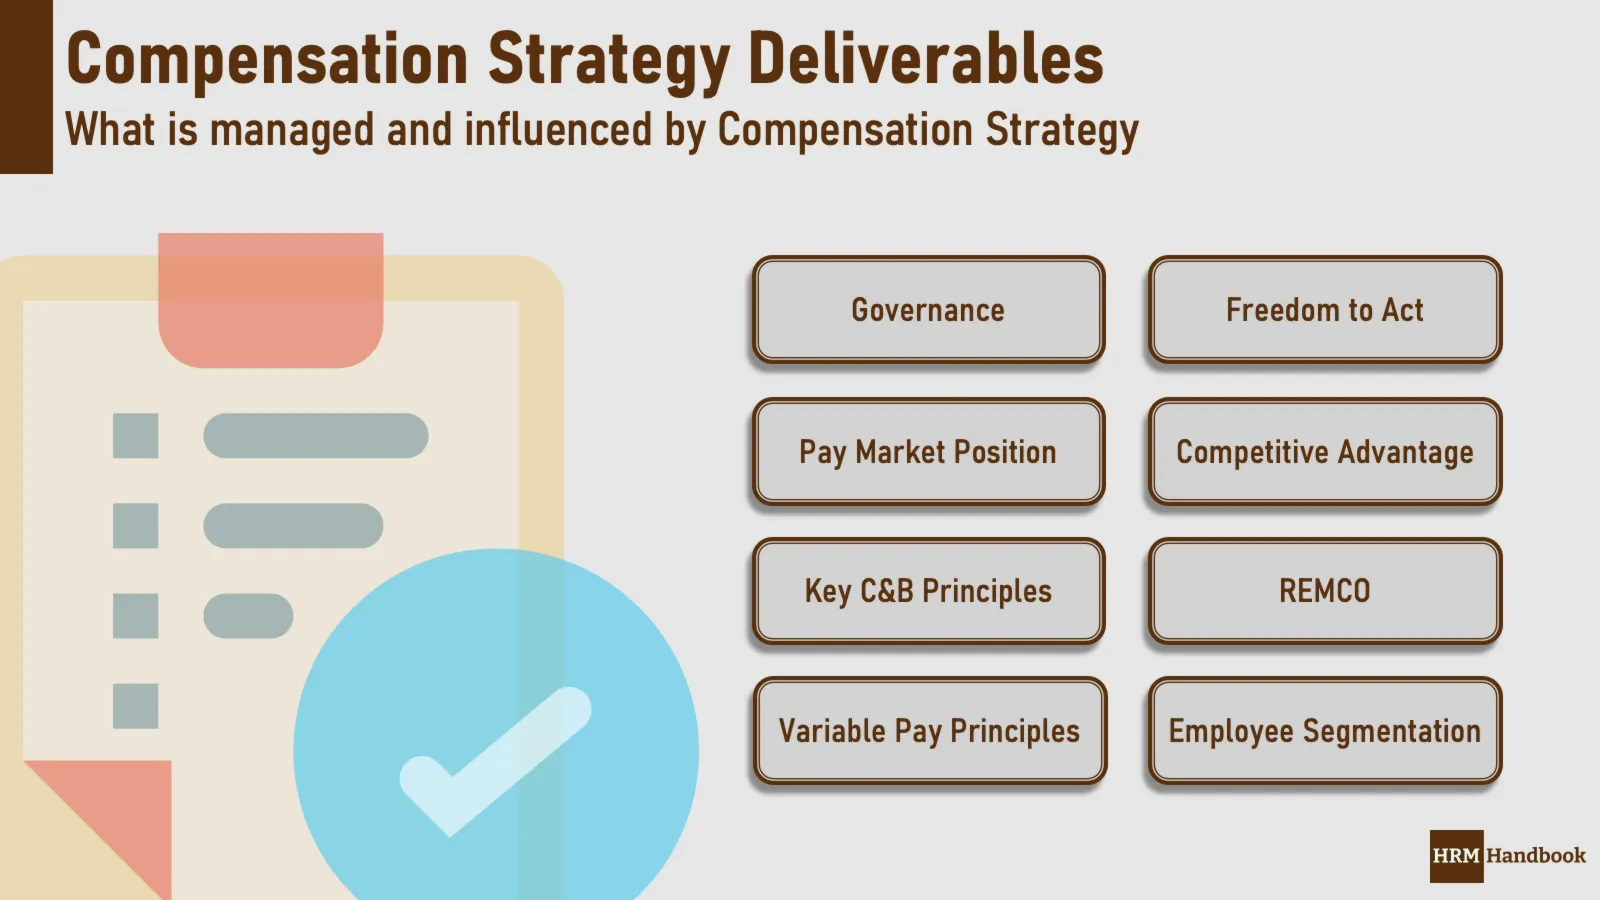 Compensation Strategy Deliverables: What outcomes are coming from a well prepared document, including governance, processes, market position and split between fix and variable pay